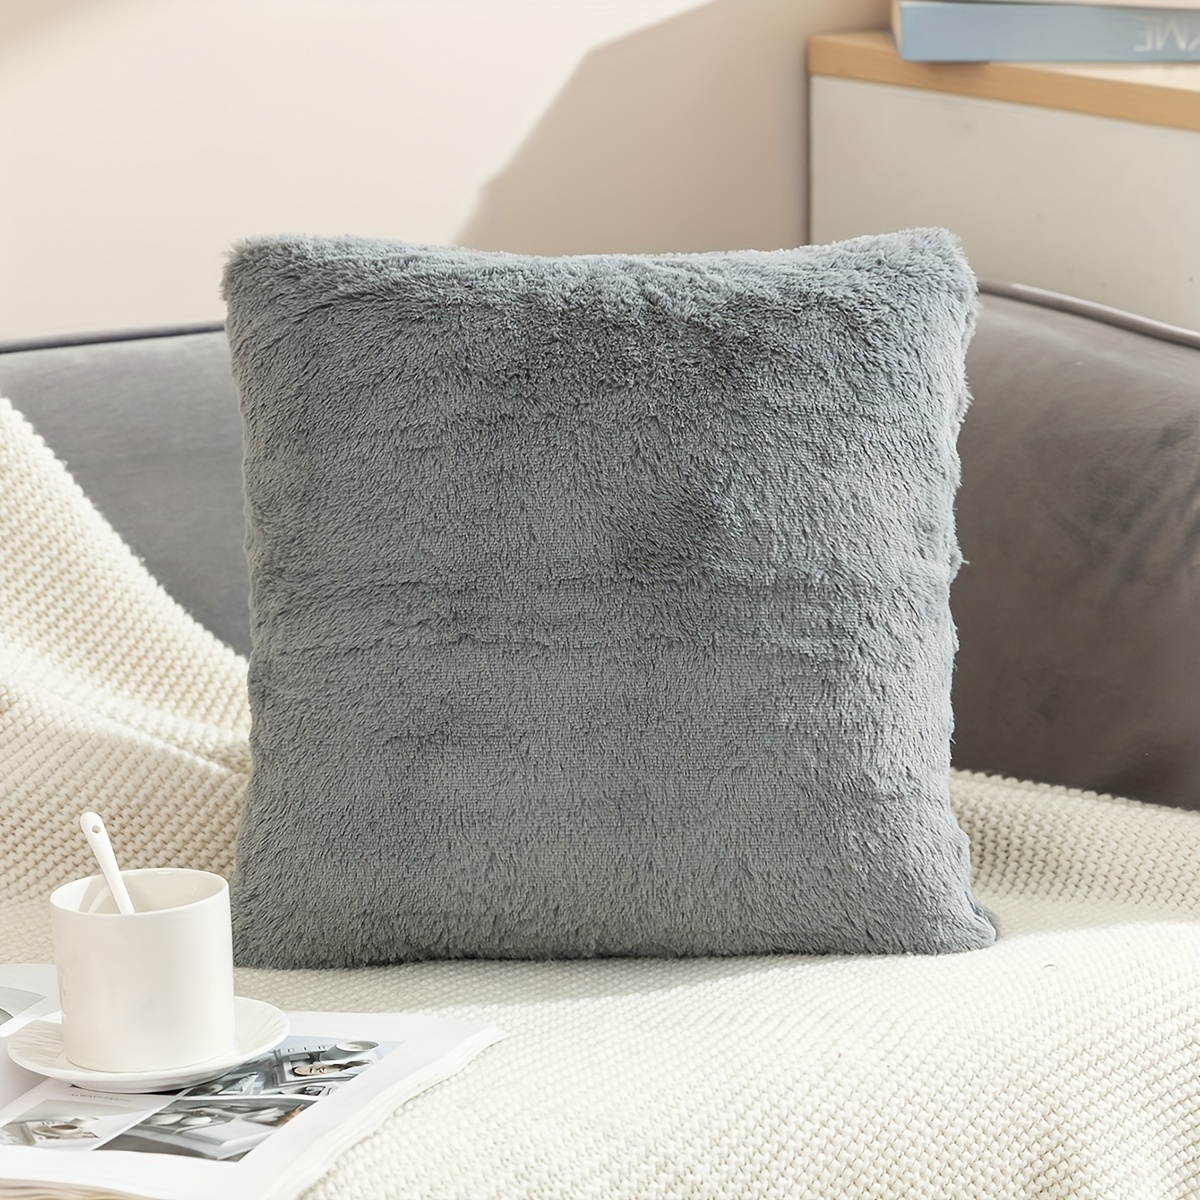 

1pc, Styled Solid Color Plush Throw Pillow Cover, Soft Cozy Square Cushion Case For Sofa And Bed, 18x18 Inches, Grey, Home Decor, Room Decor, Bedroom Decor, Living Room Decor